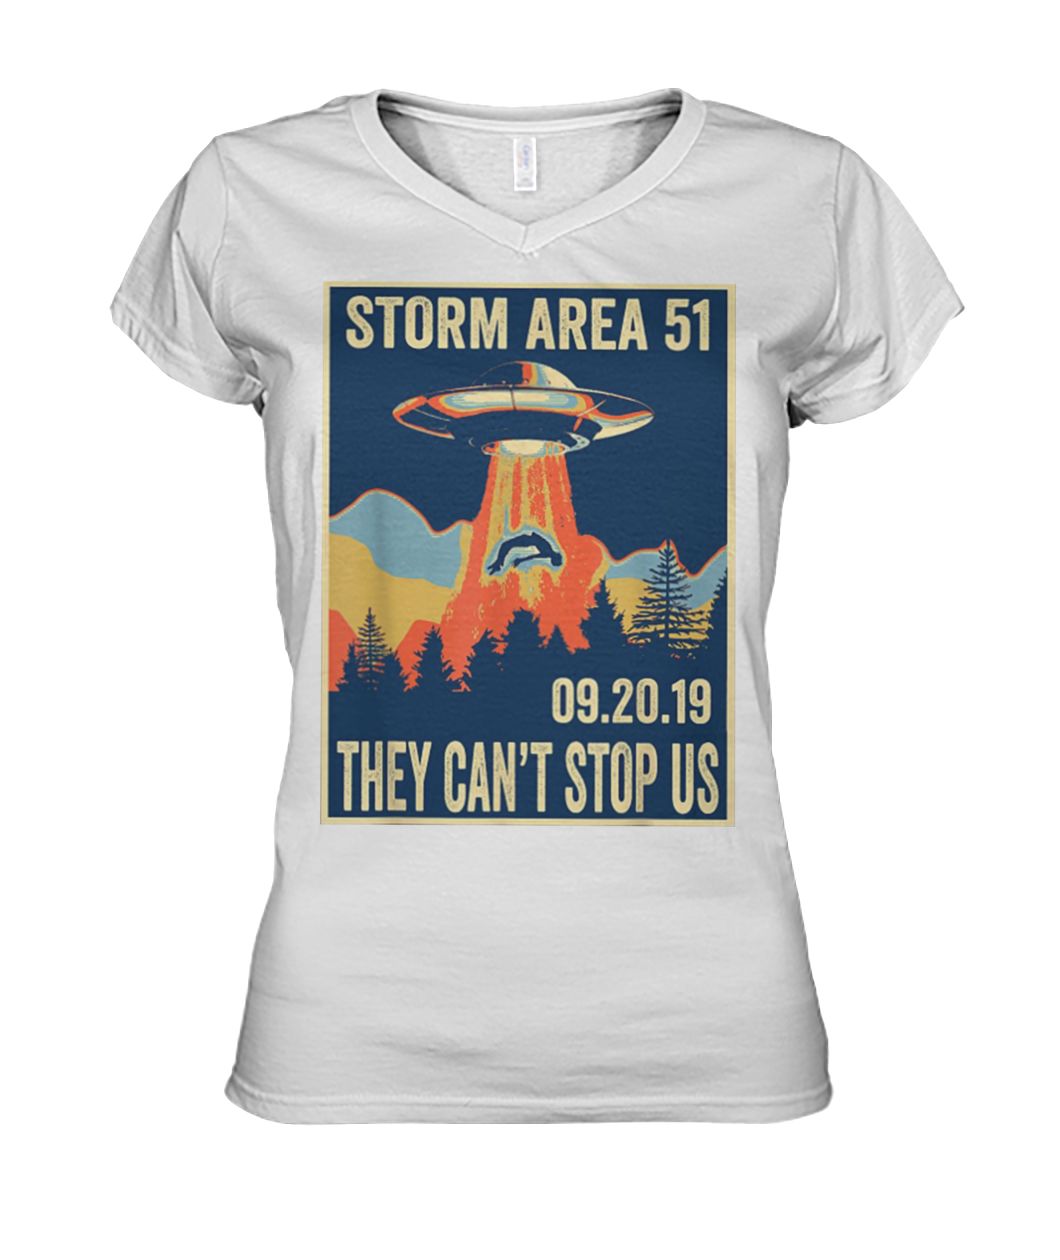 Storm area 51 alien ufo they can't stop us vintage poster women's v-neck